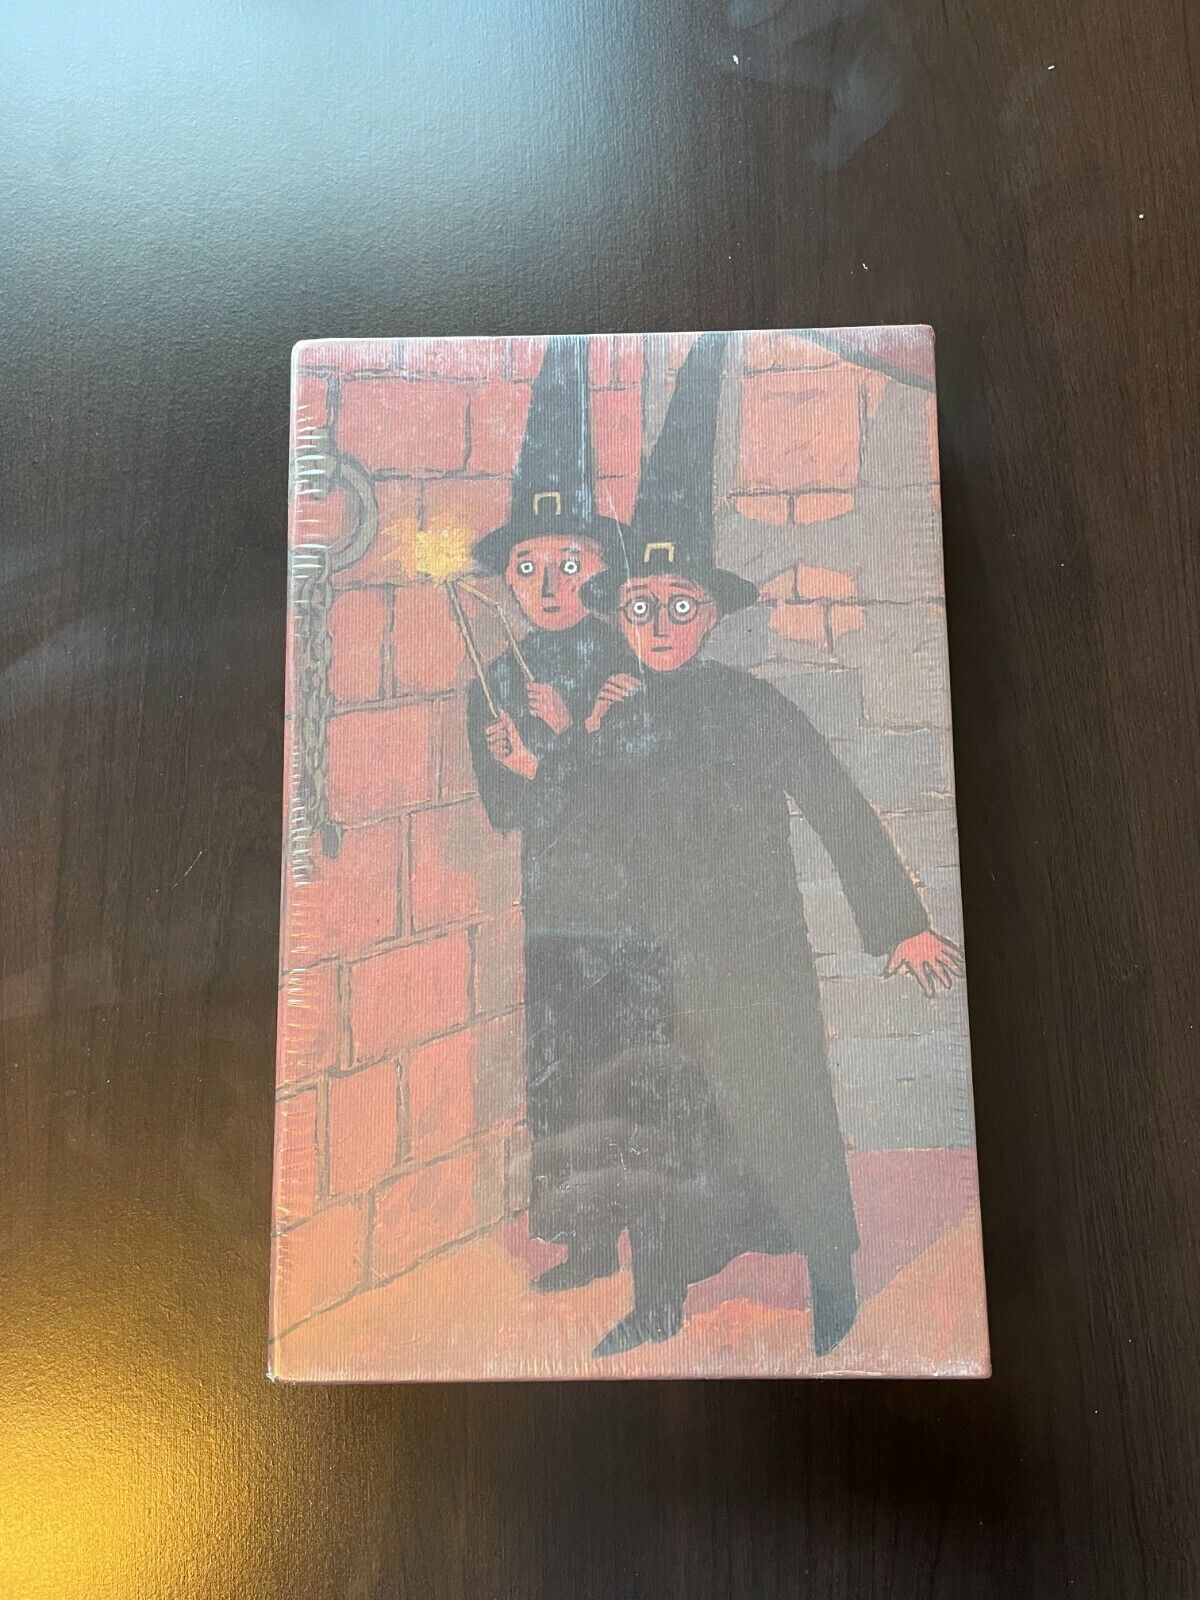 Harry Potter French Edition - Deluxe Slipcase Gallimard - 2nd Book Sealed *NEW*